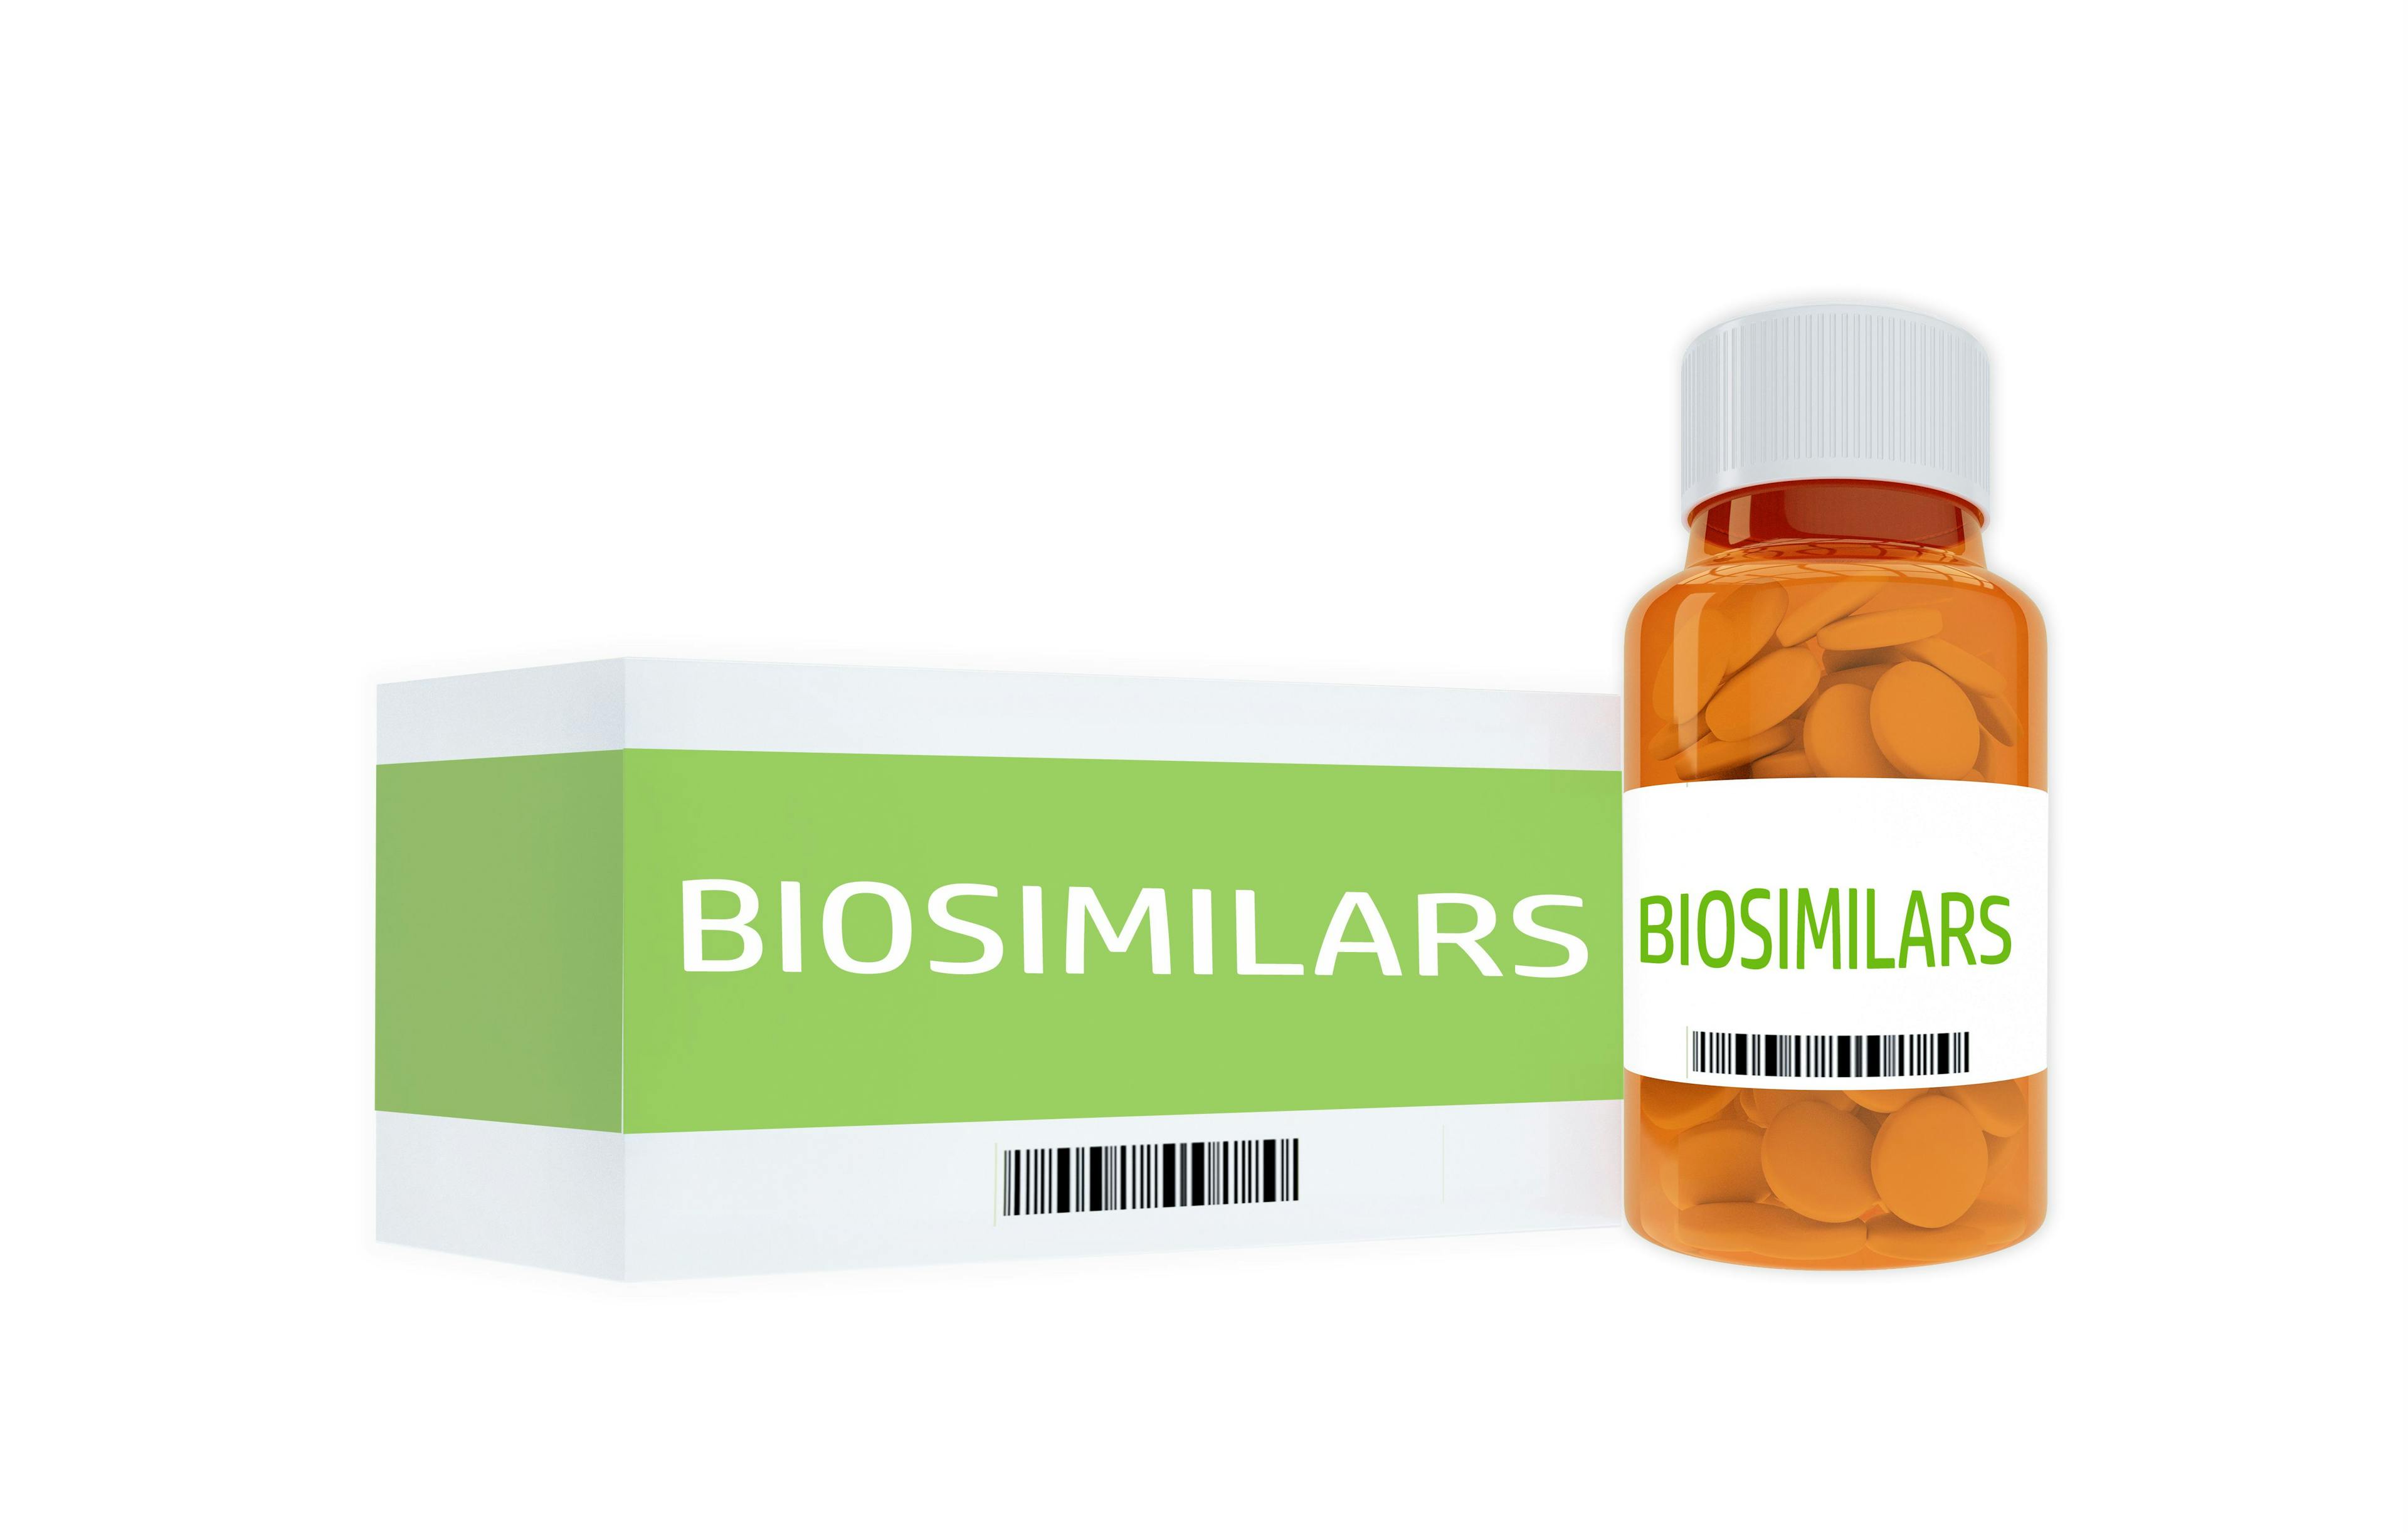 Ranibizumab biosimilar achieves similar results in patients with polypoidal choroidal vasculopathy